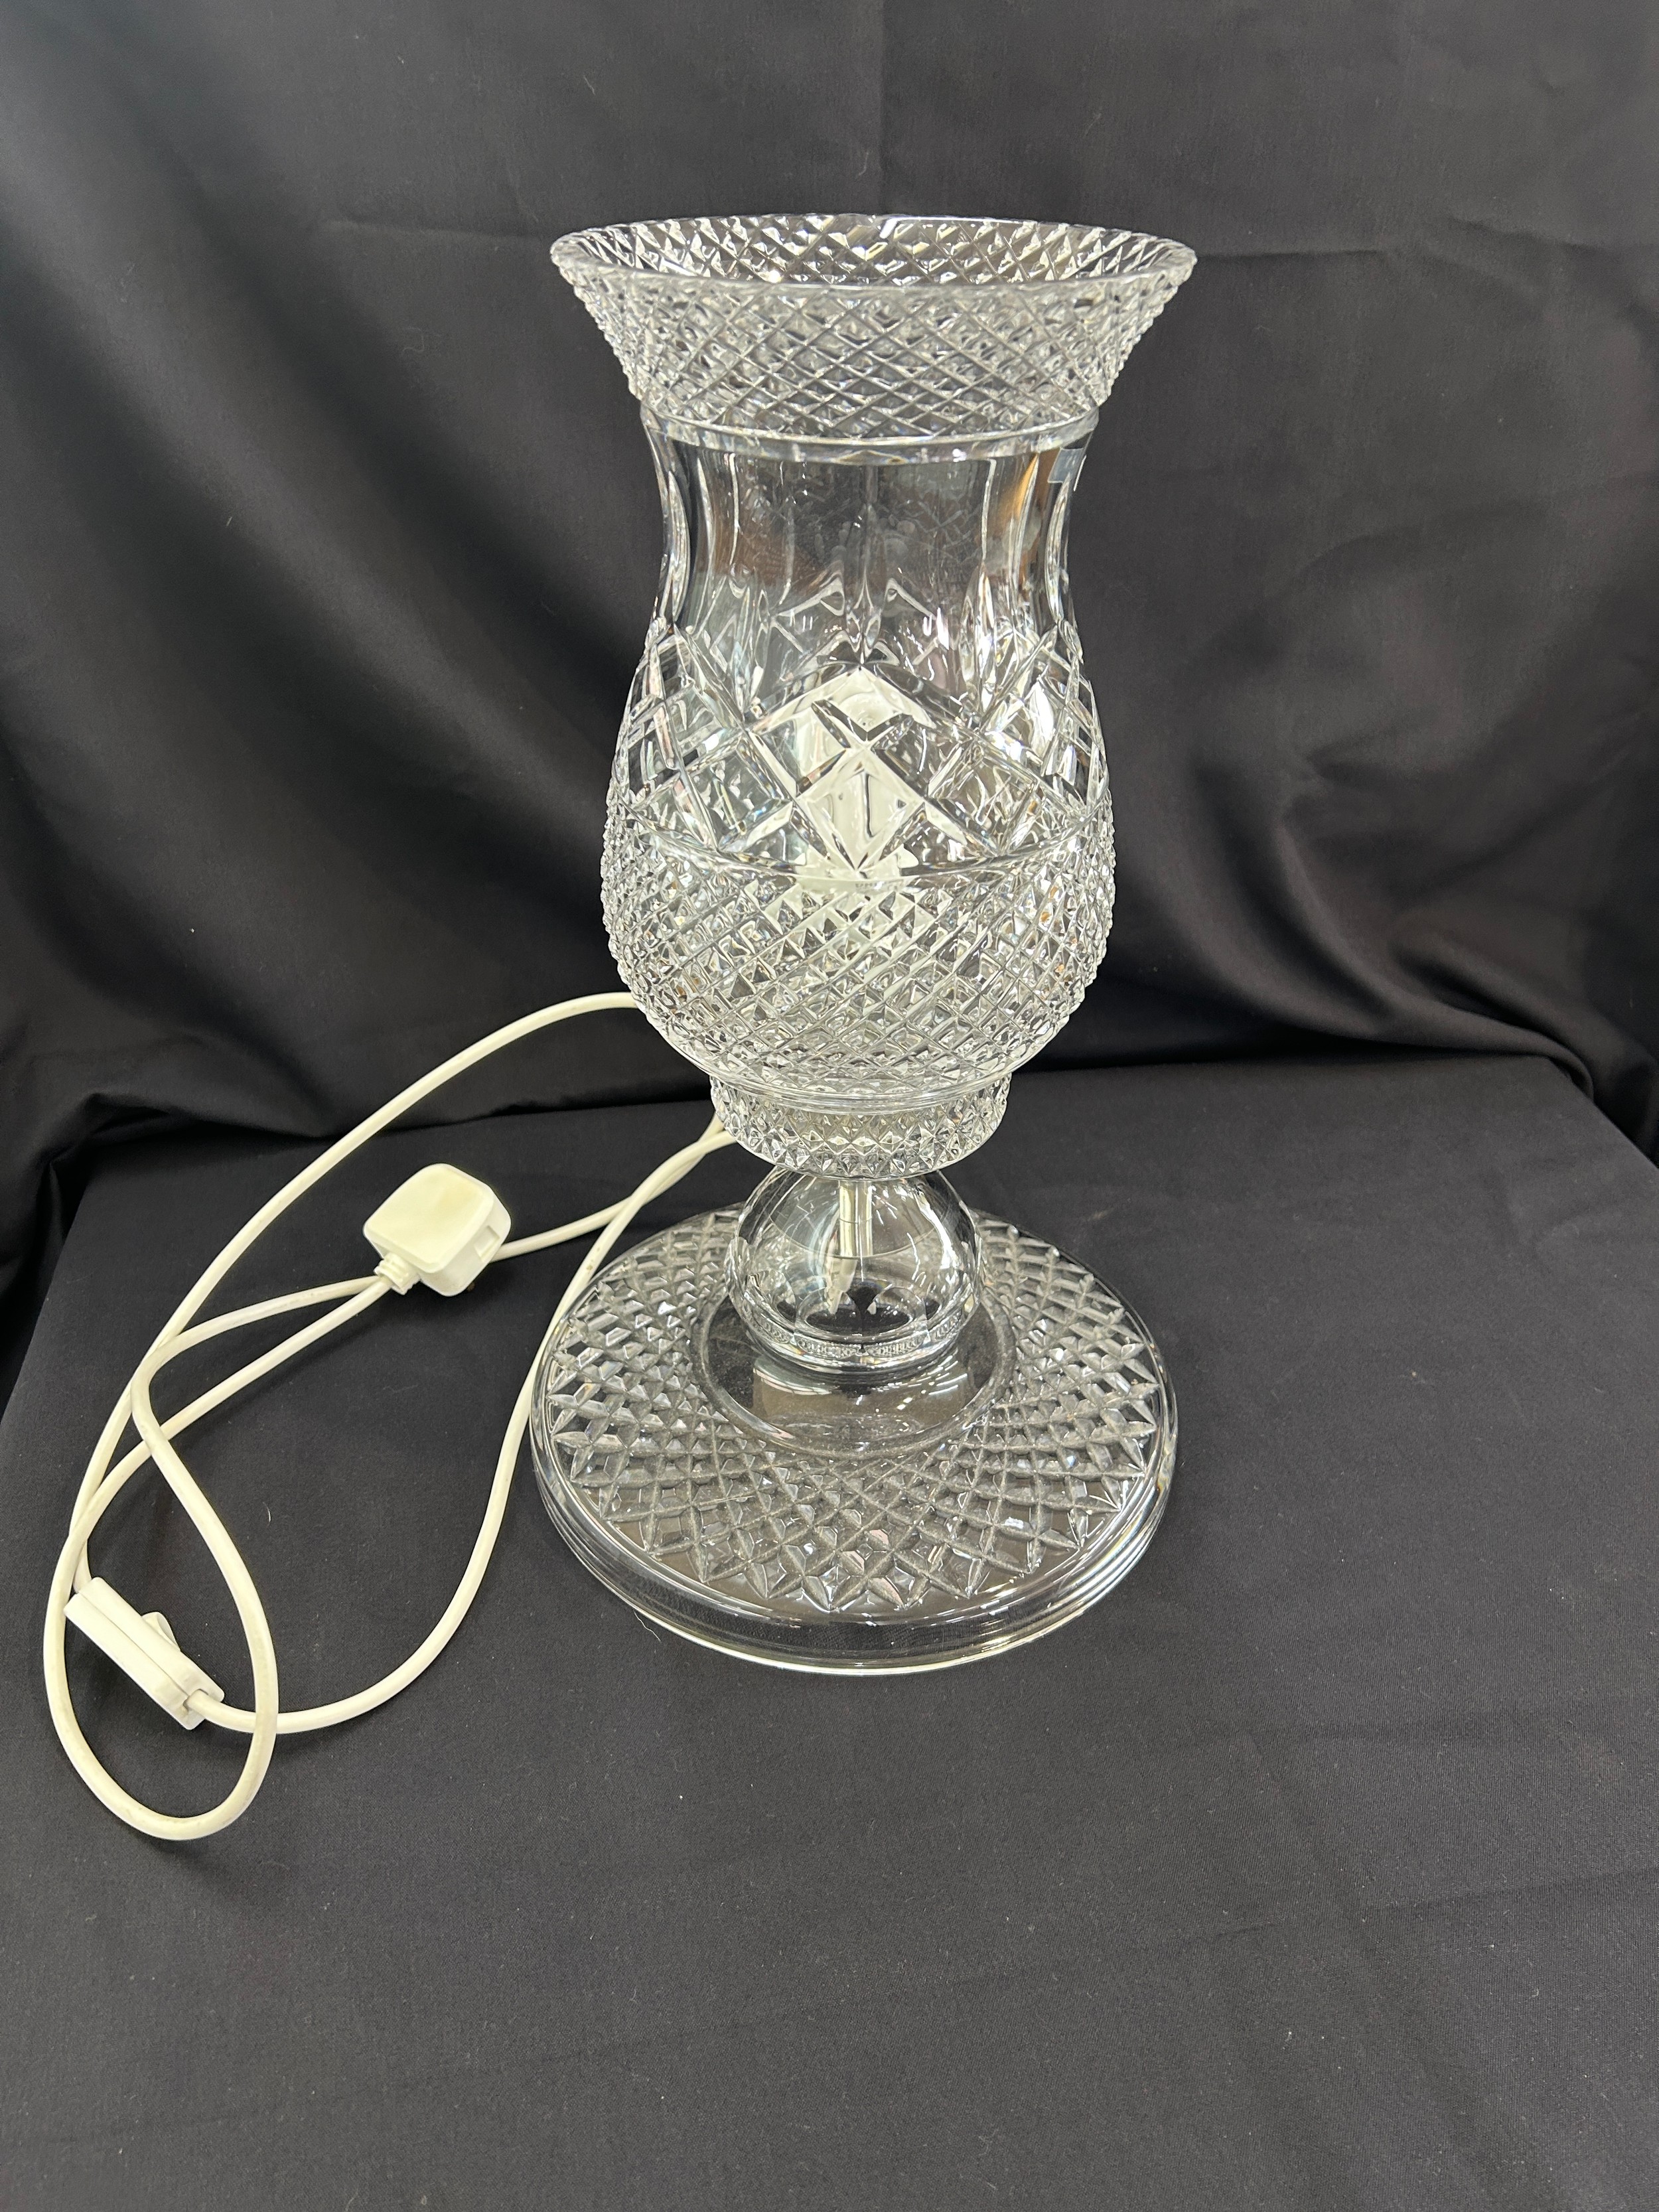 Cut glass table lamp measures approx 16 inches tall, diameter of base 10 inches - Image 3 of 3